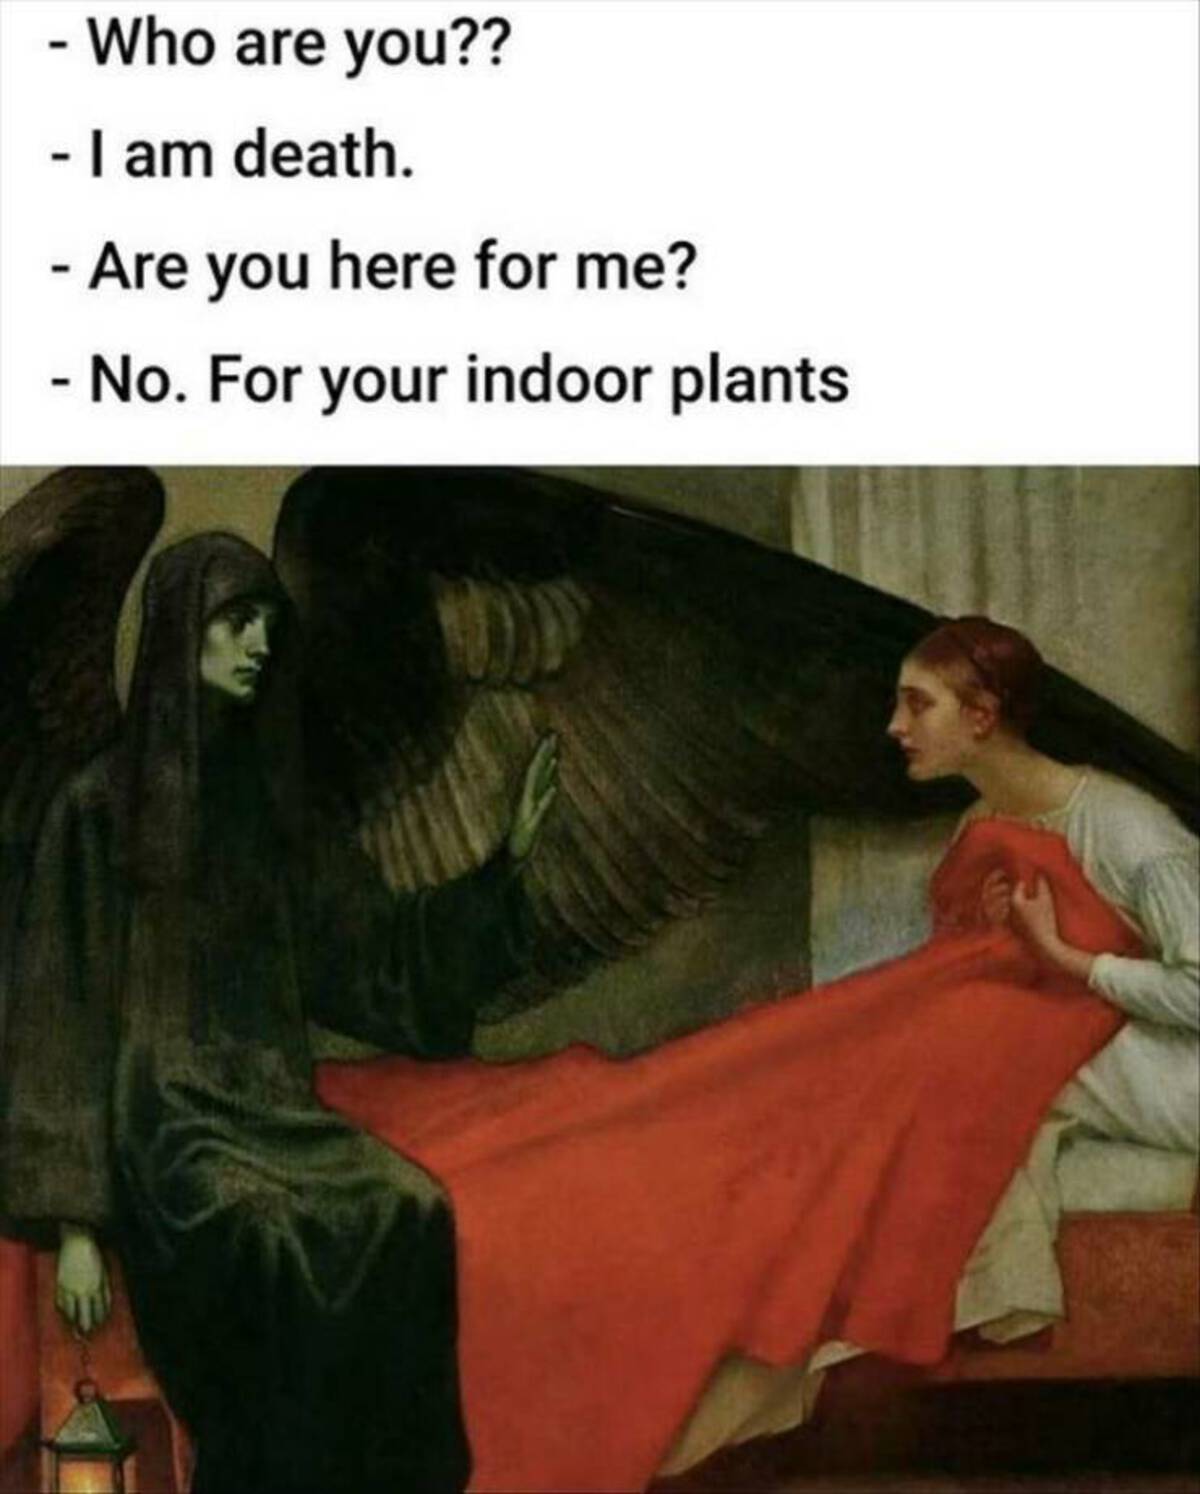 young girl and death - Who are you?? I am death. Are you here for me? No. For your indoor plants D